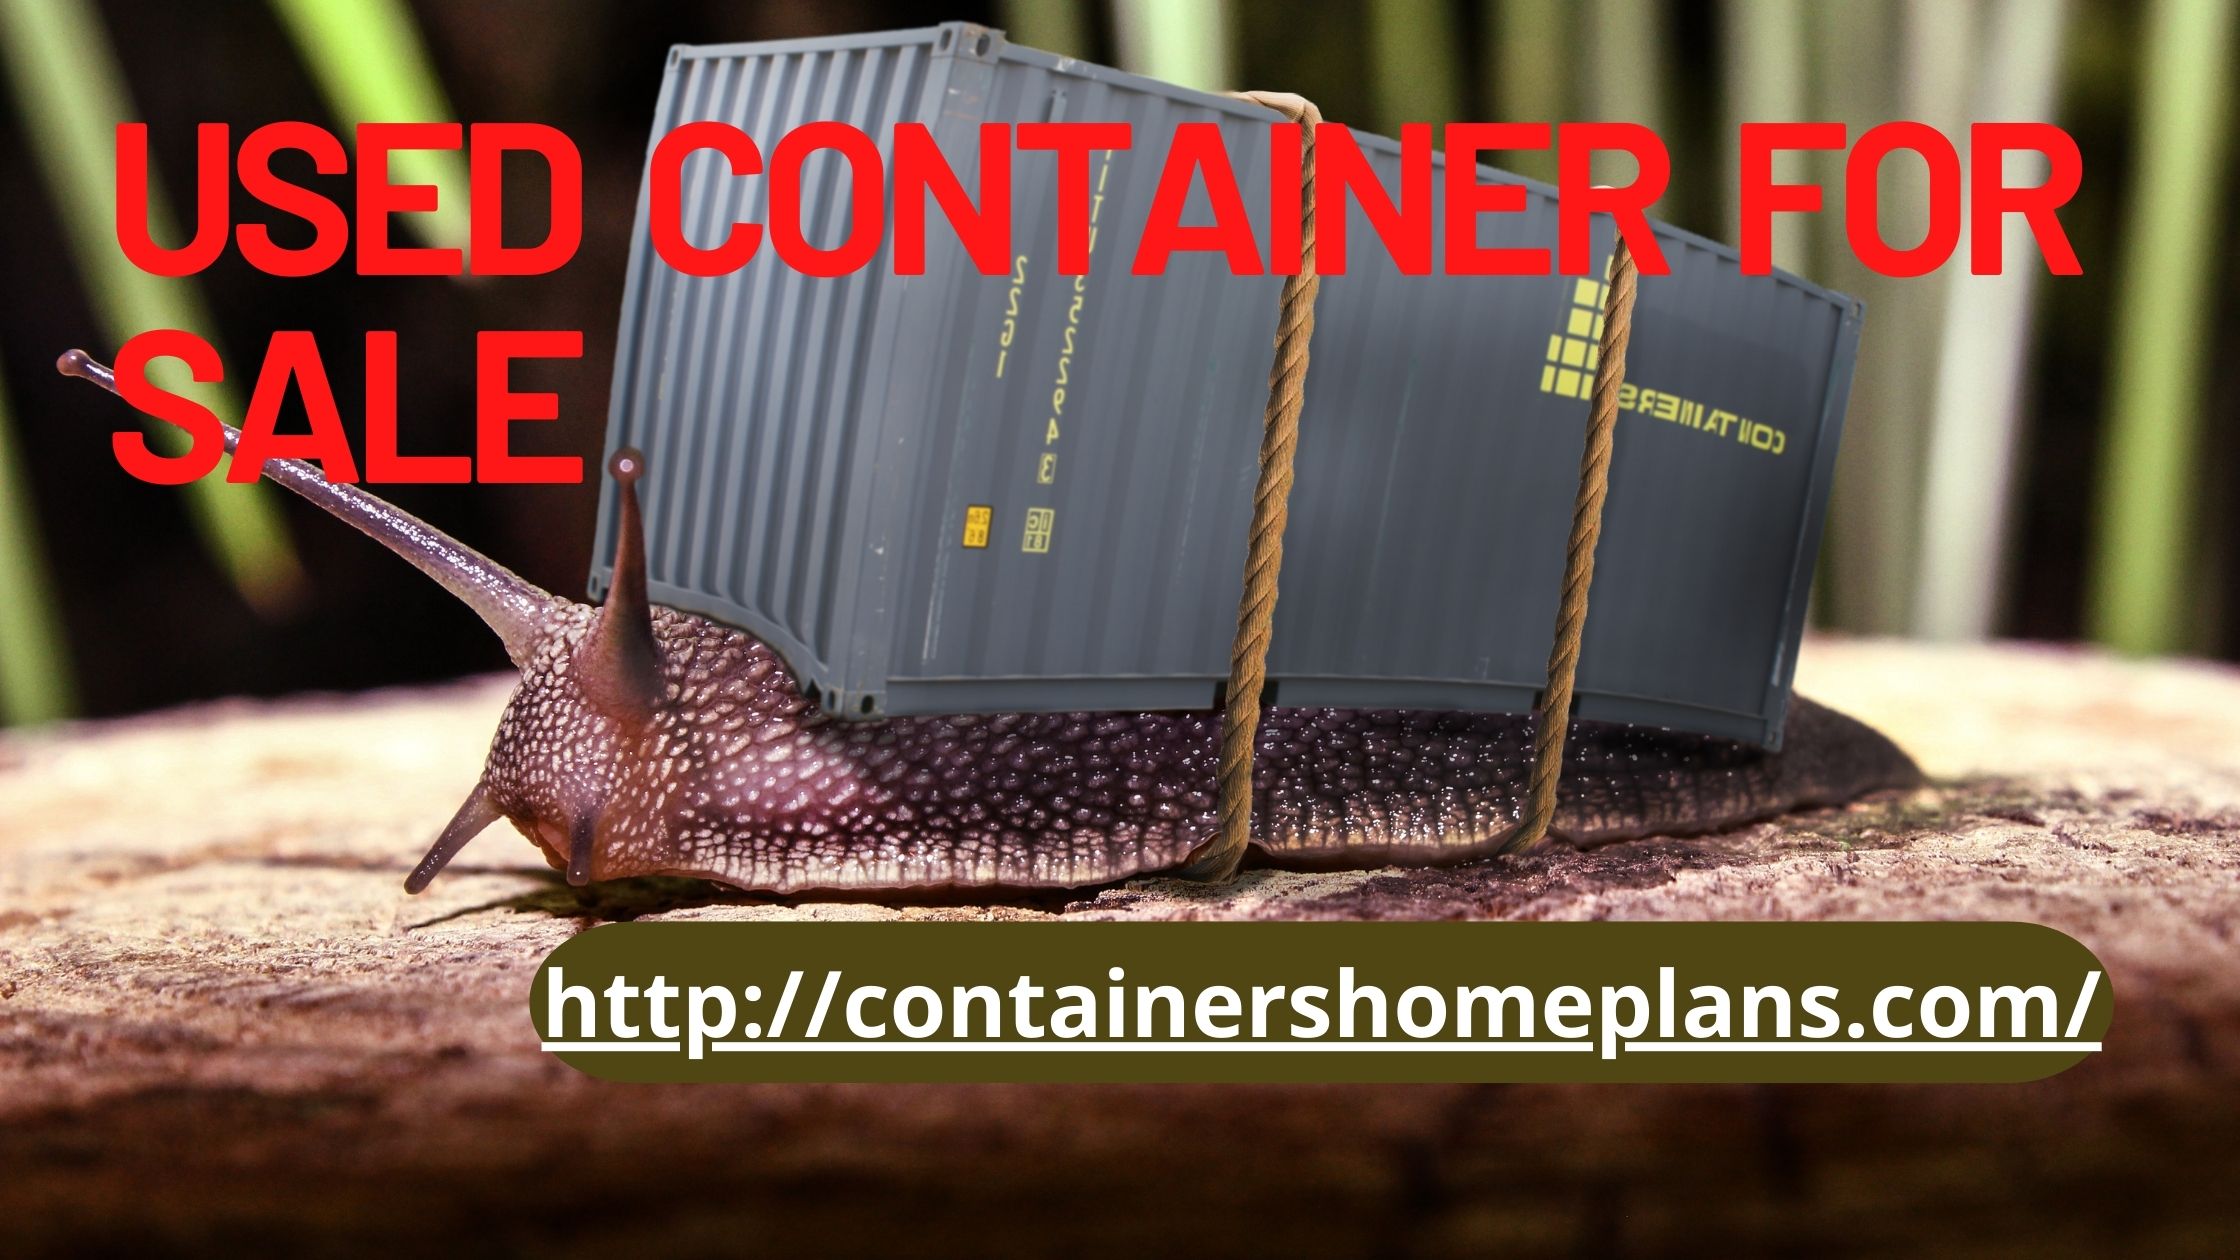 Used container for sale